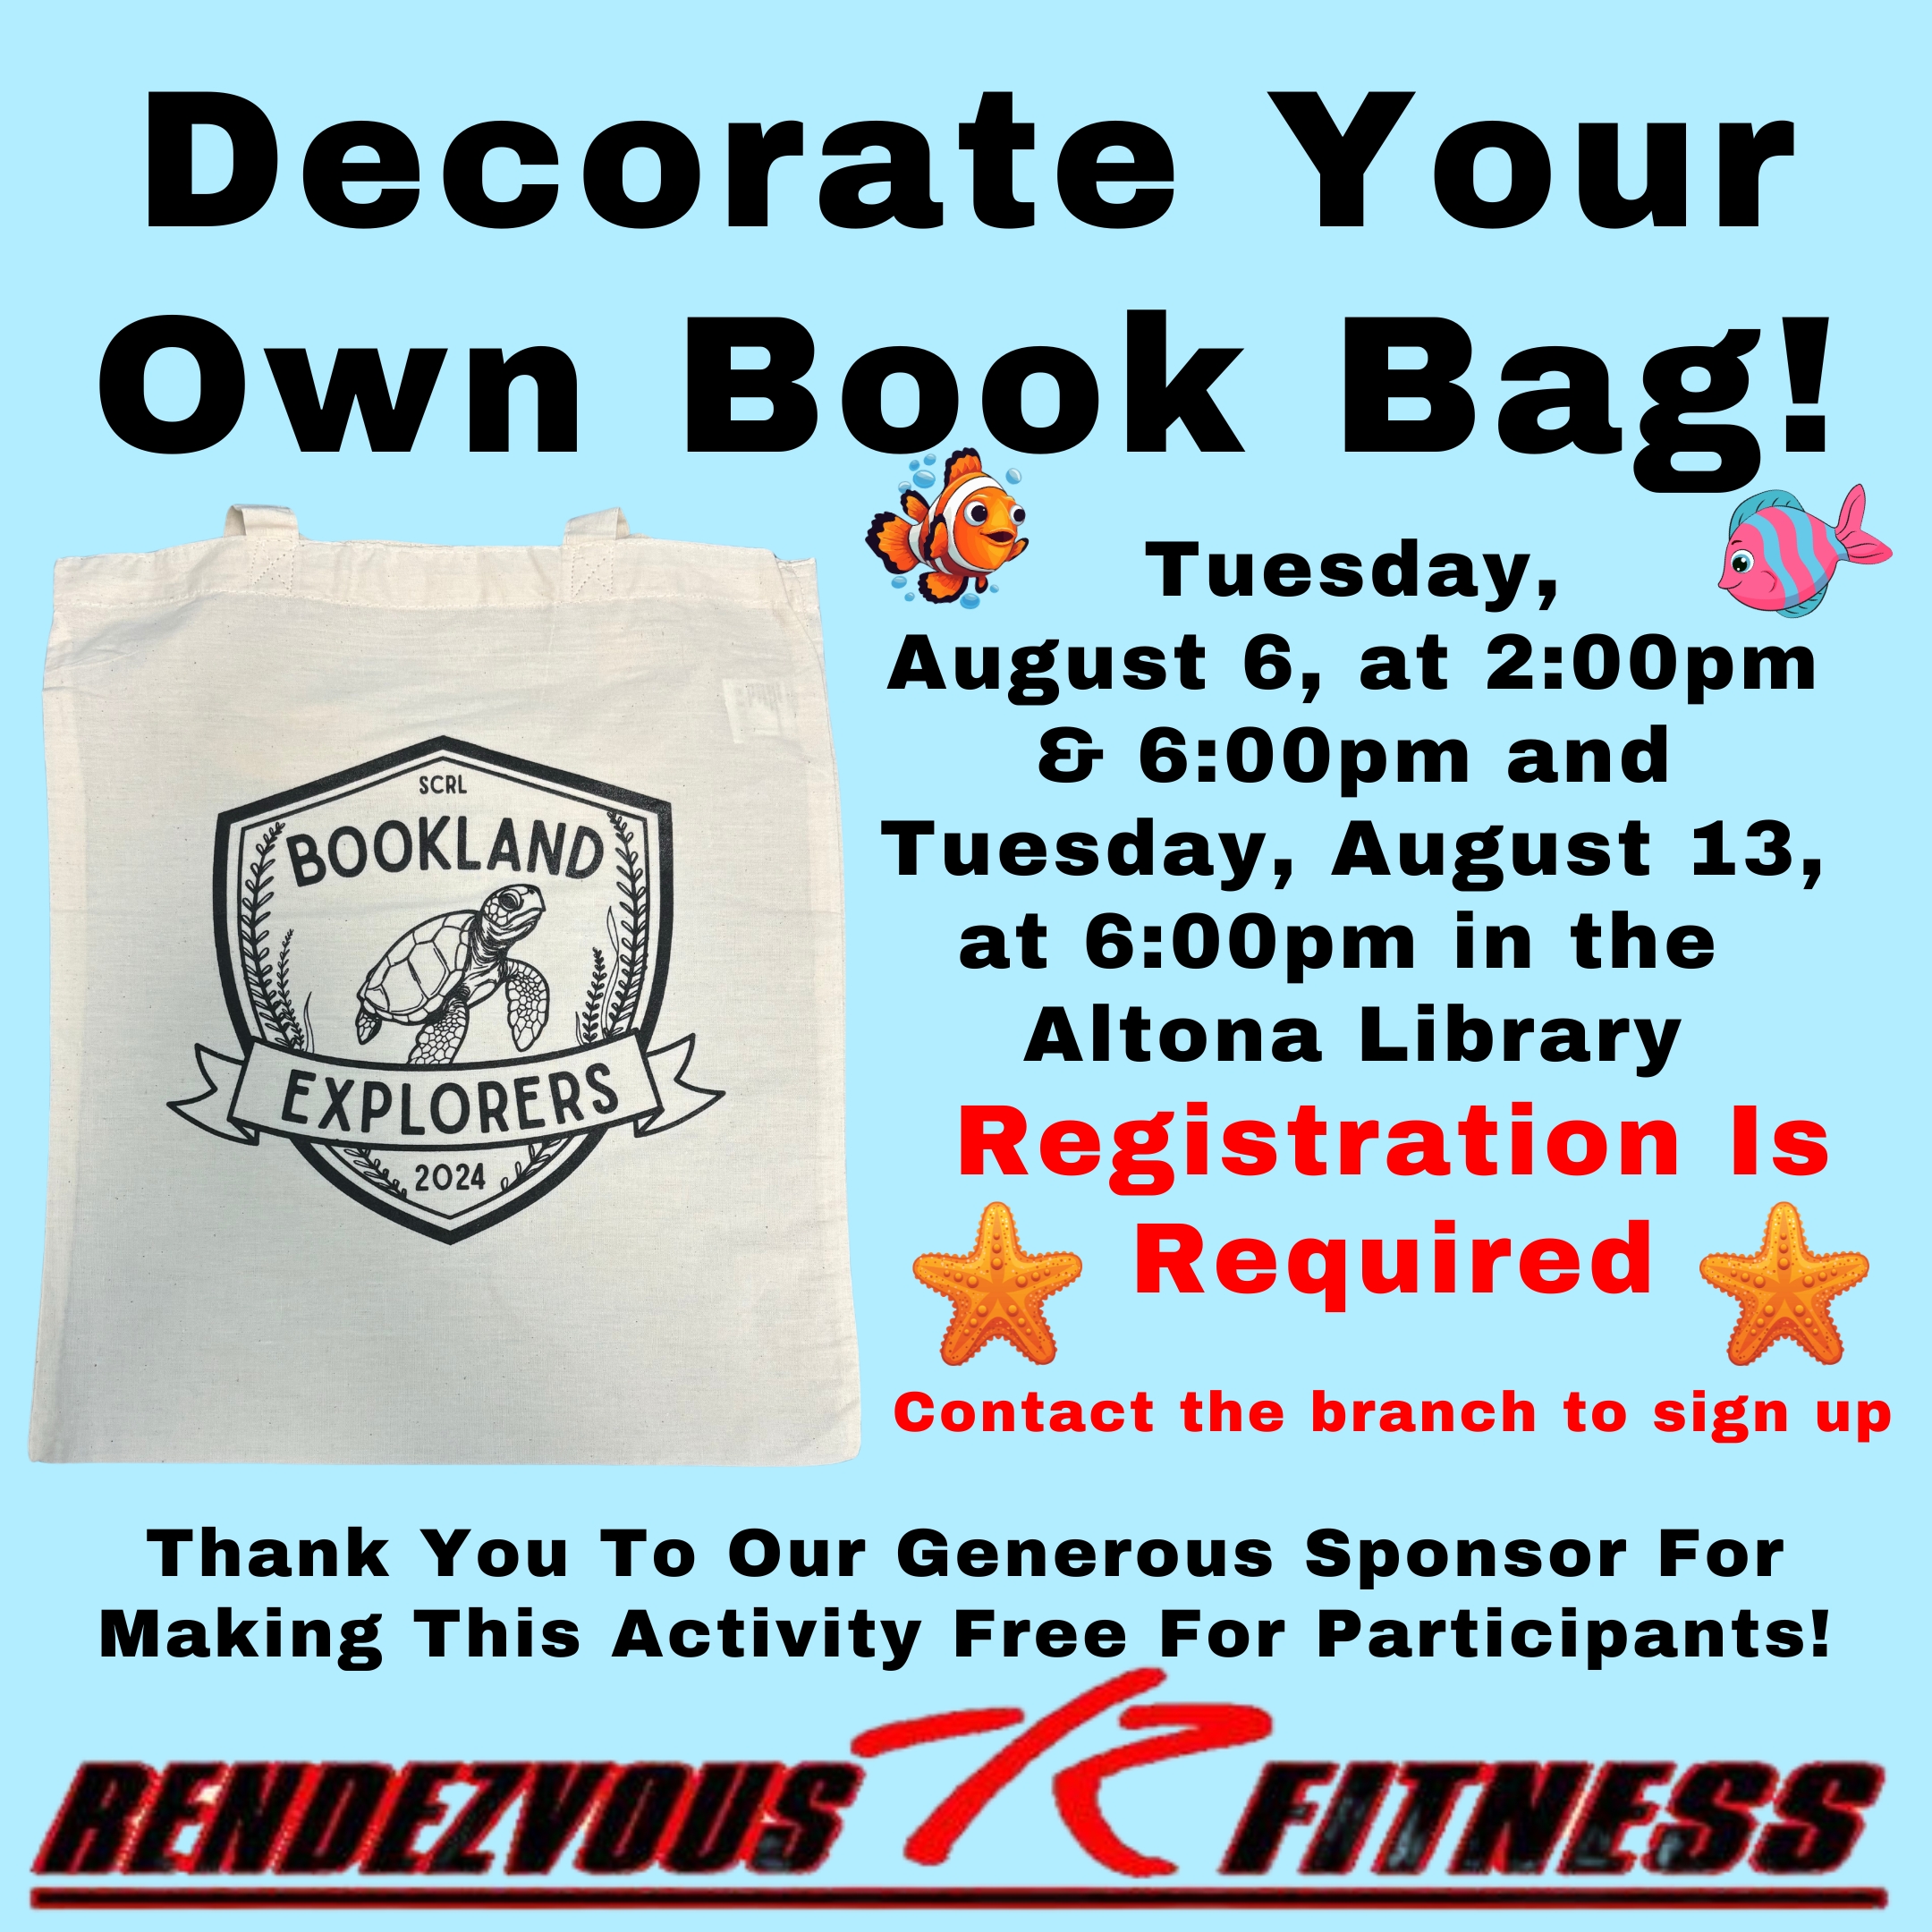 Poster for decorate your own book activity on Tuesday August 6 at 2pm & 6pm and Tuesday, August 13 at 6pm at the Altona library